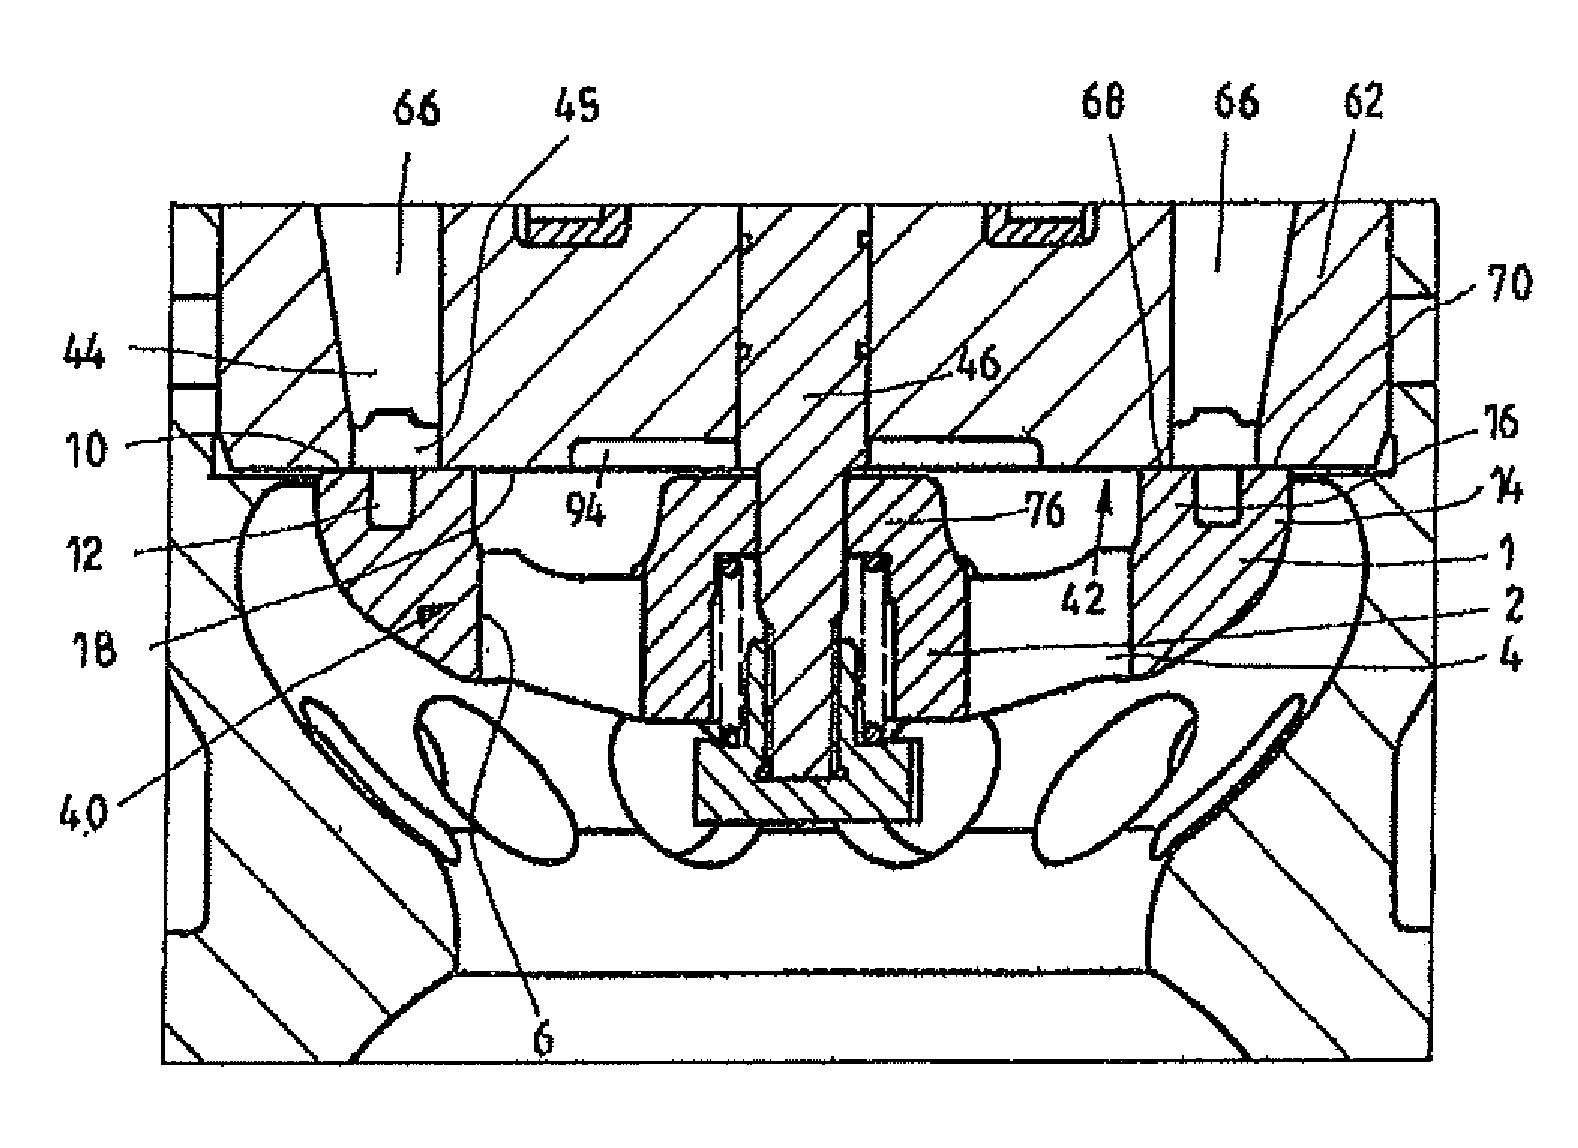 Low-pressure valve with an inner and outer throughflow cross section